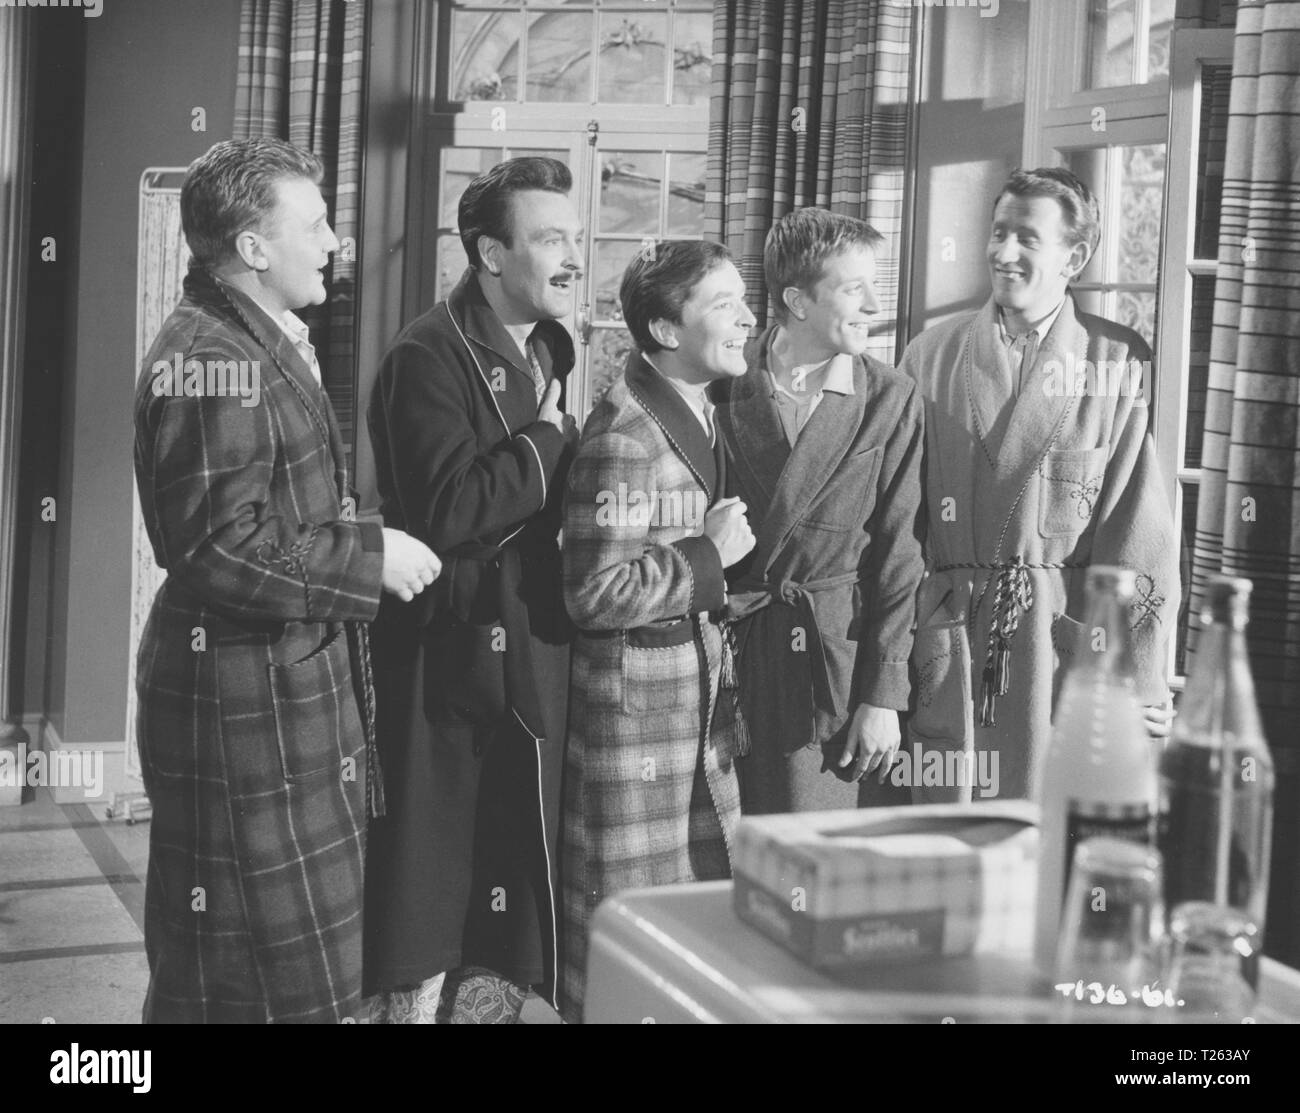 Due volte intorno le giunchiglie (1962) Kenneth Willliams, Donald Sinden, Lance Percival, Andrew Ray, Donald Houston, Data: 1962 Foto Stock